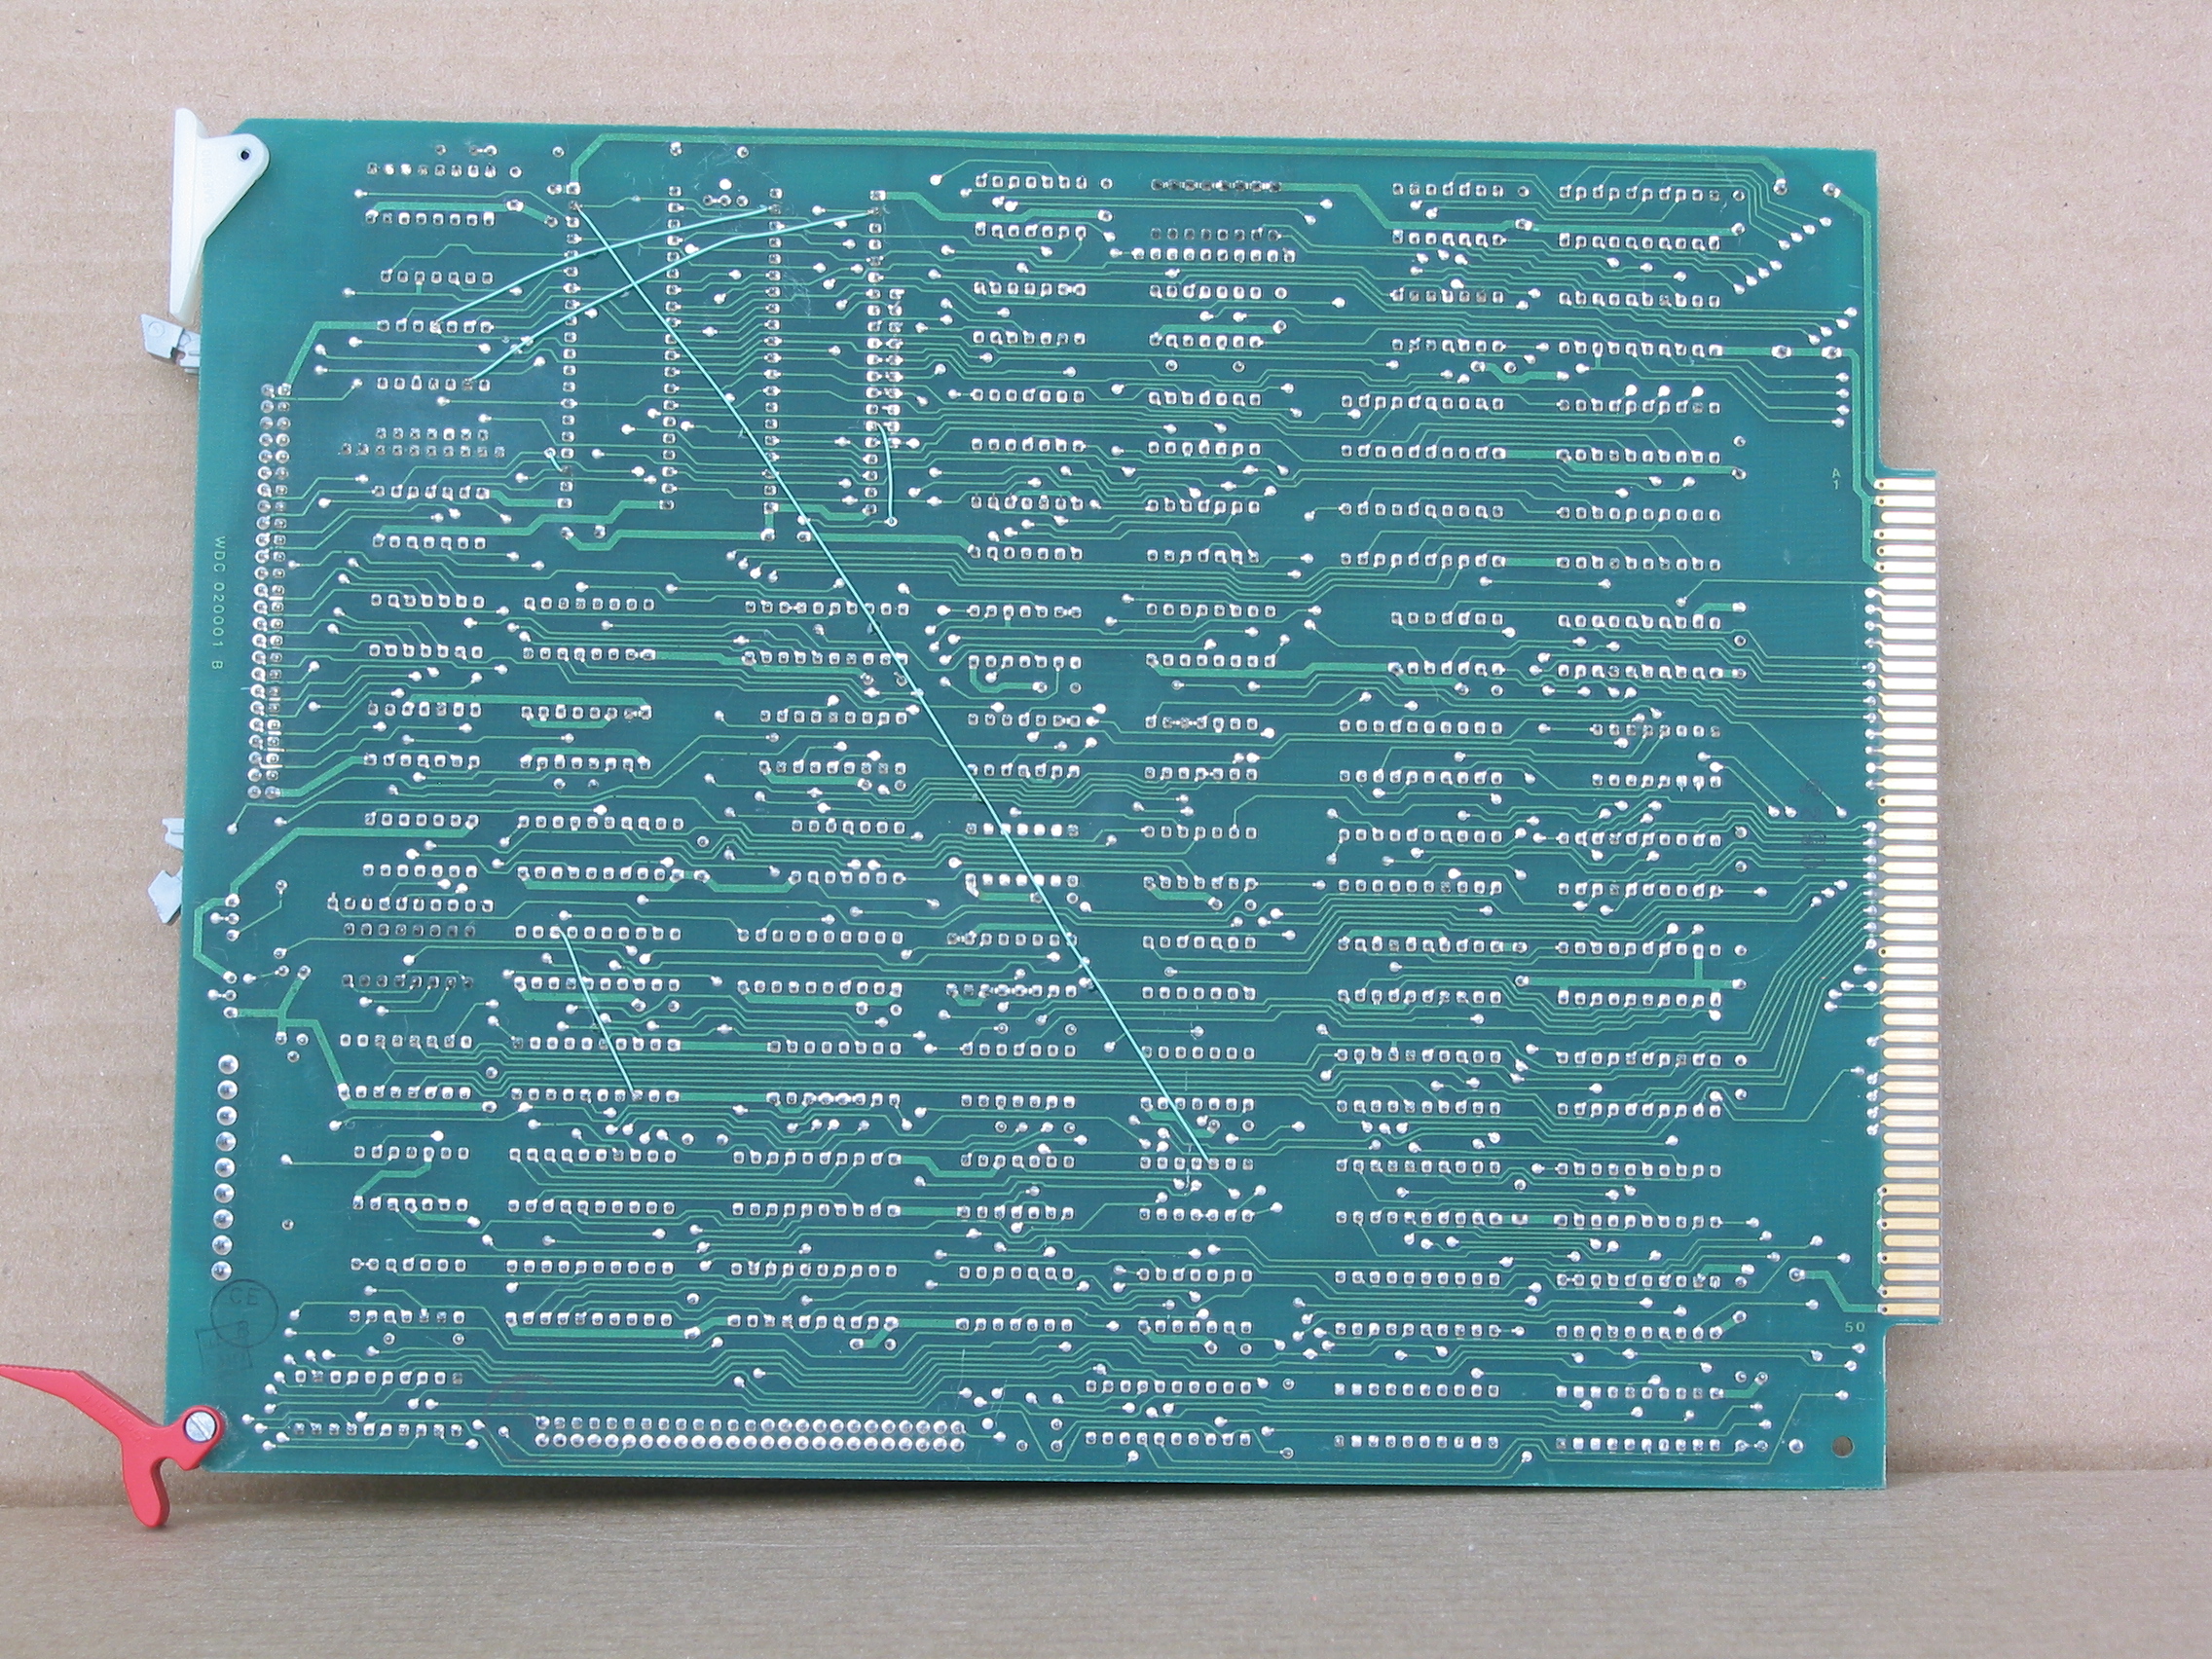 floppy disk controller card, circuit side